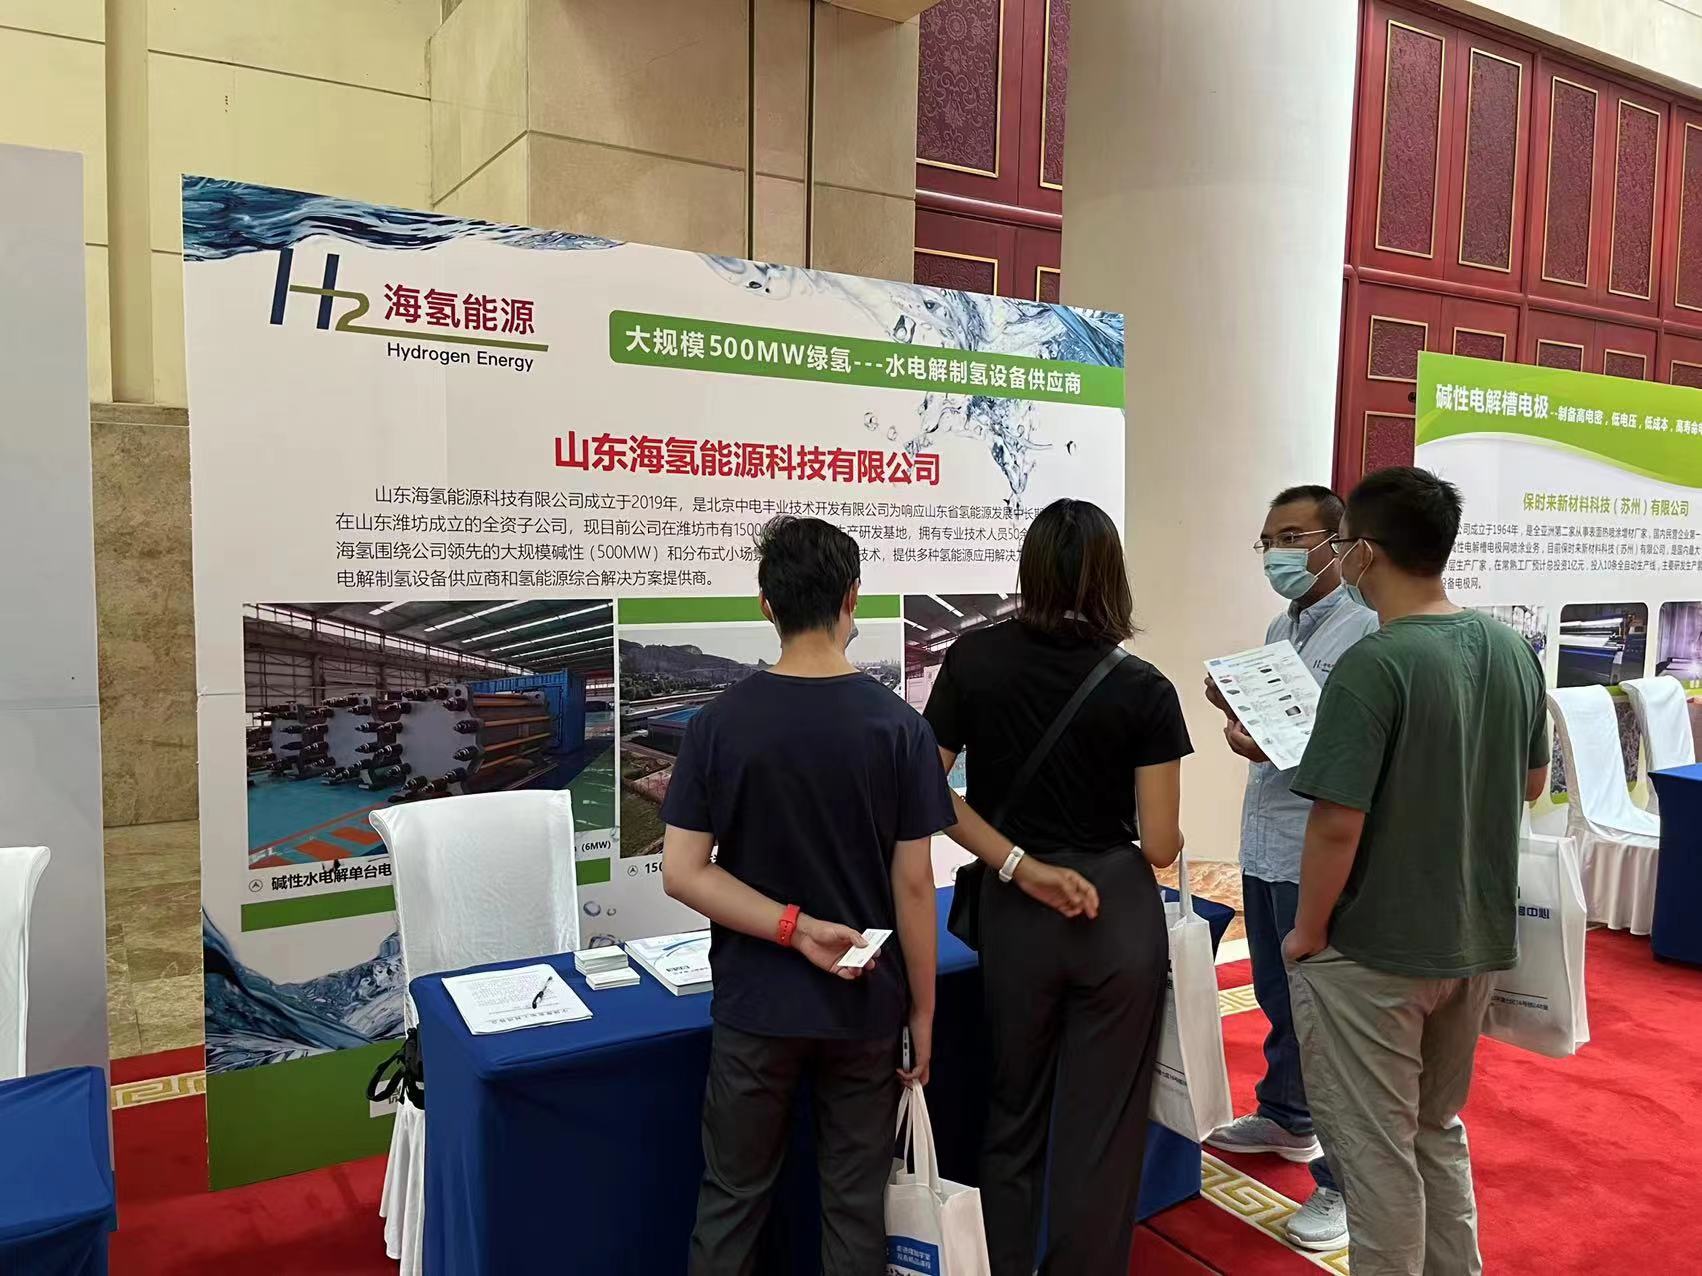 SinoHy Energy's wholly-owned subsidiary, Shandong Hydrogen Energy Technology Co., Ltd., presented in Jinan 2022 China Hydrogen Production and Hydrogen Energy Conference